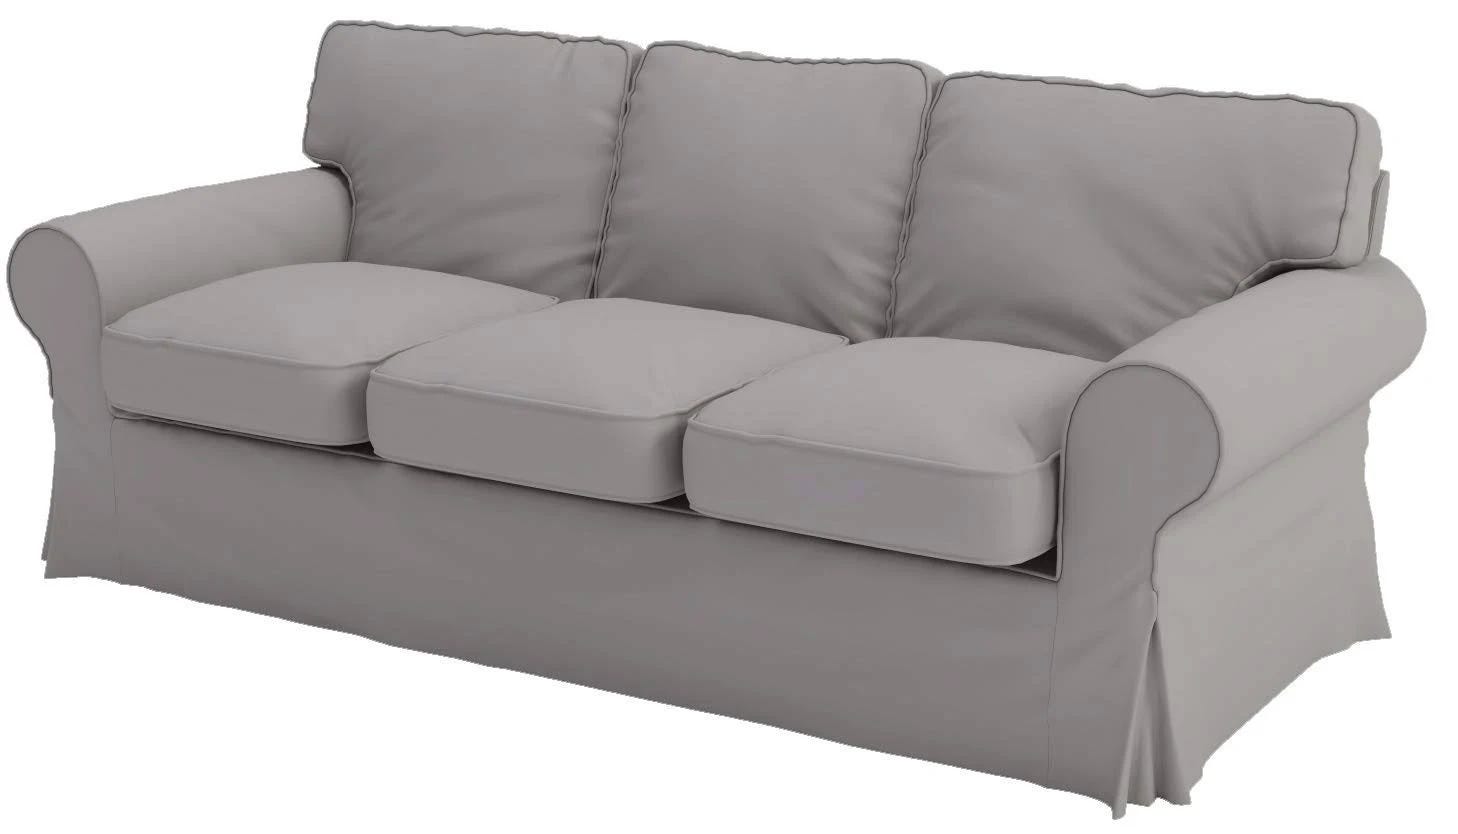 High Quality Ikea Ektorp 3.5 Seat Sofa Cover - Durable Cotton Slipcover for Indoor Furnishing | Image